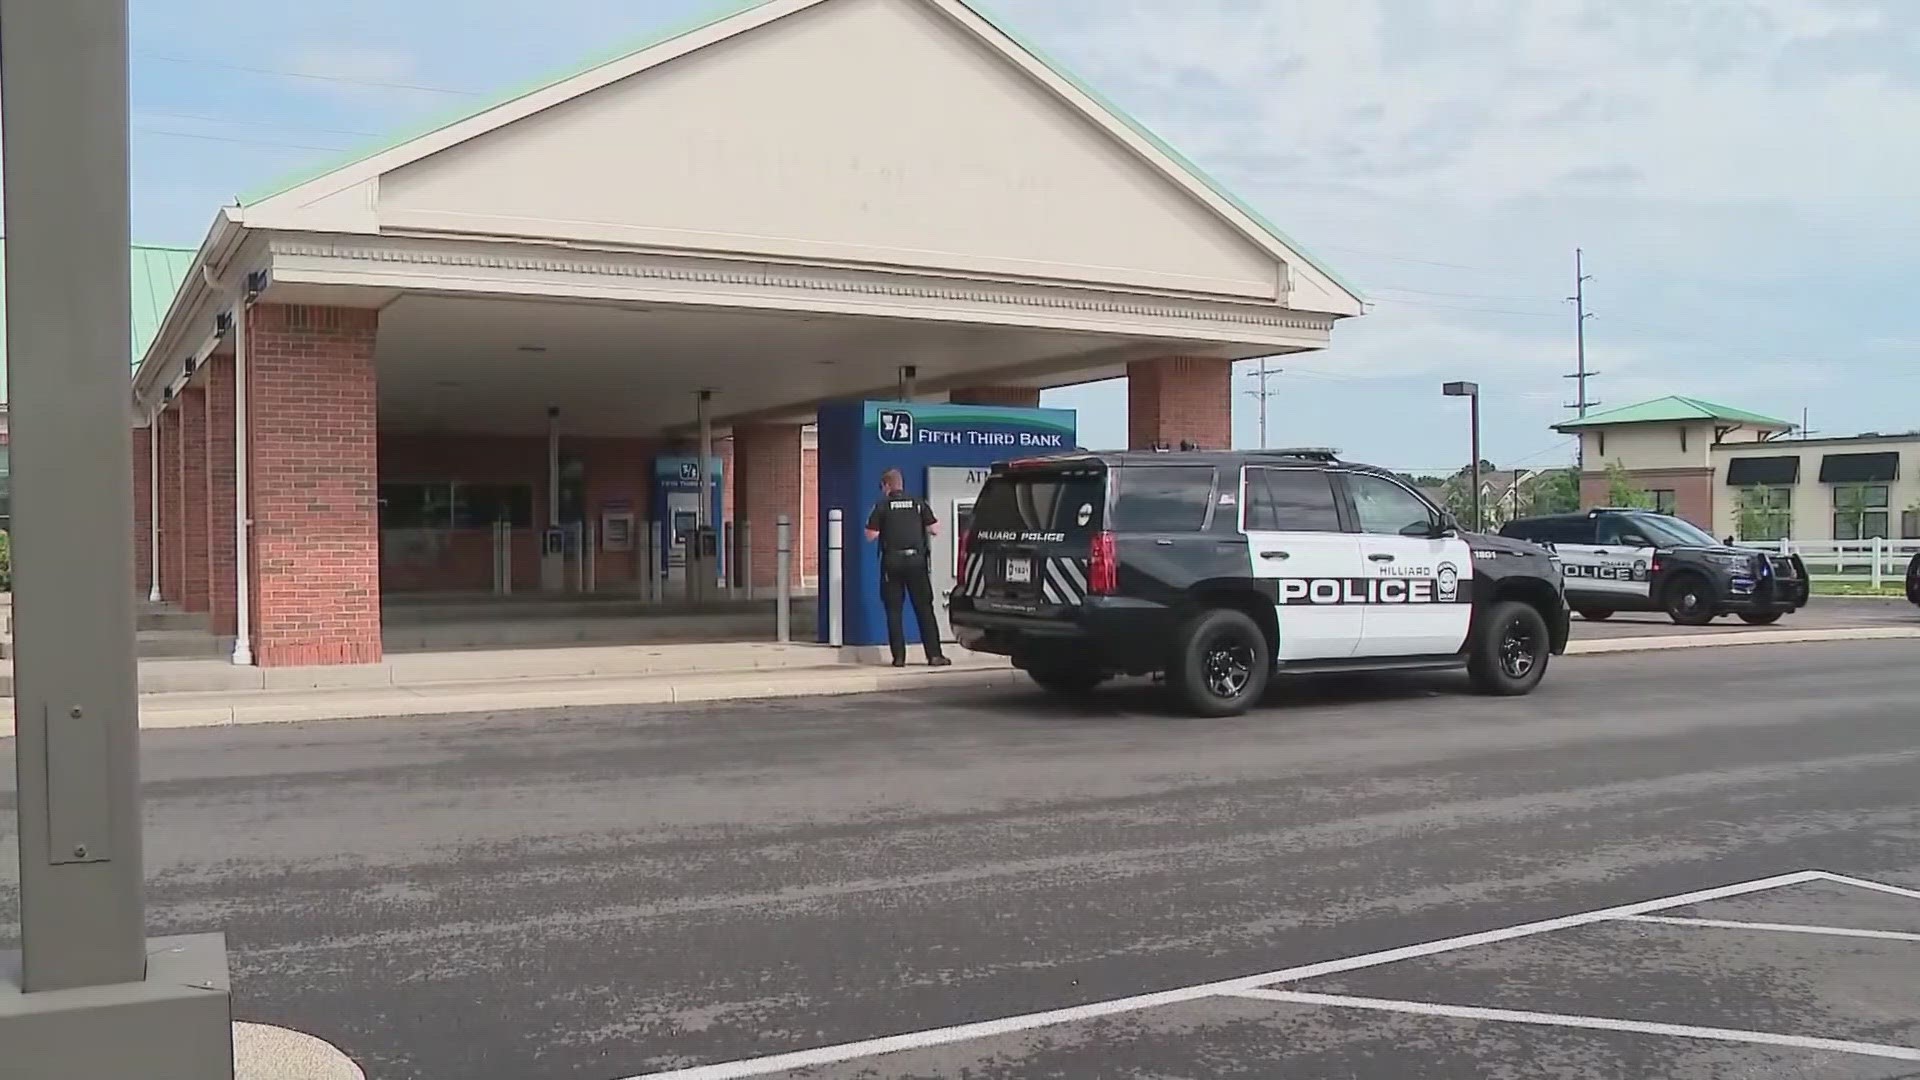 Police are investigating possible connections that the suspects may have to other bank robberies and high-end car thefts in the area.